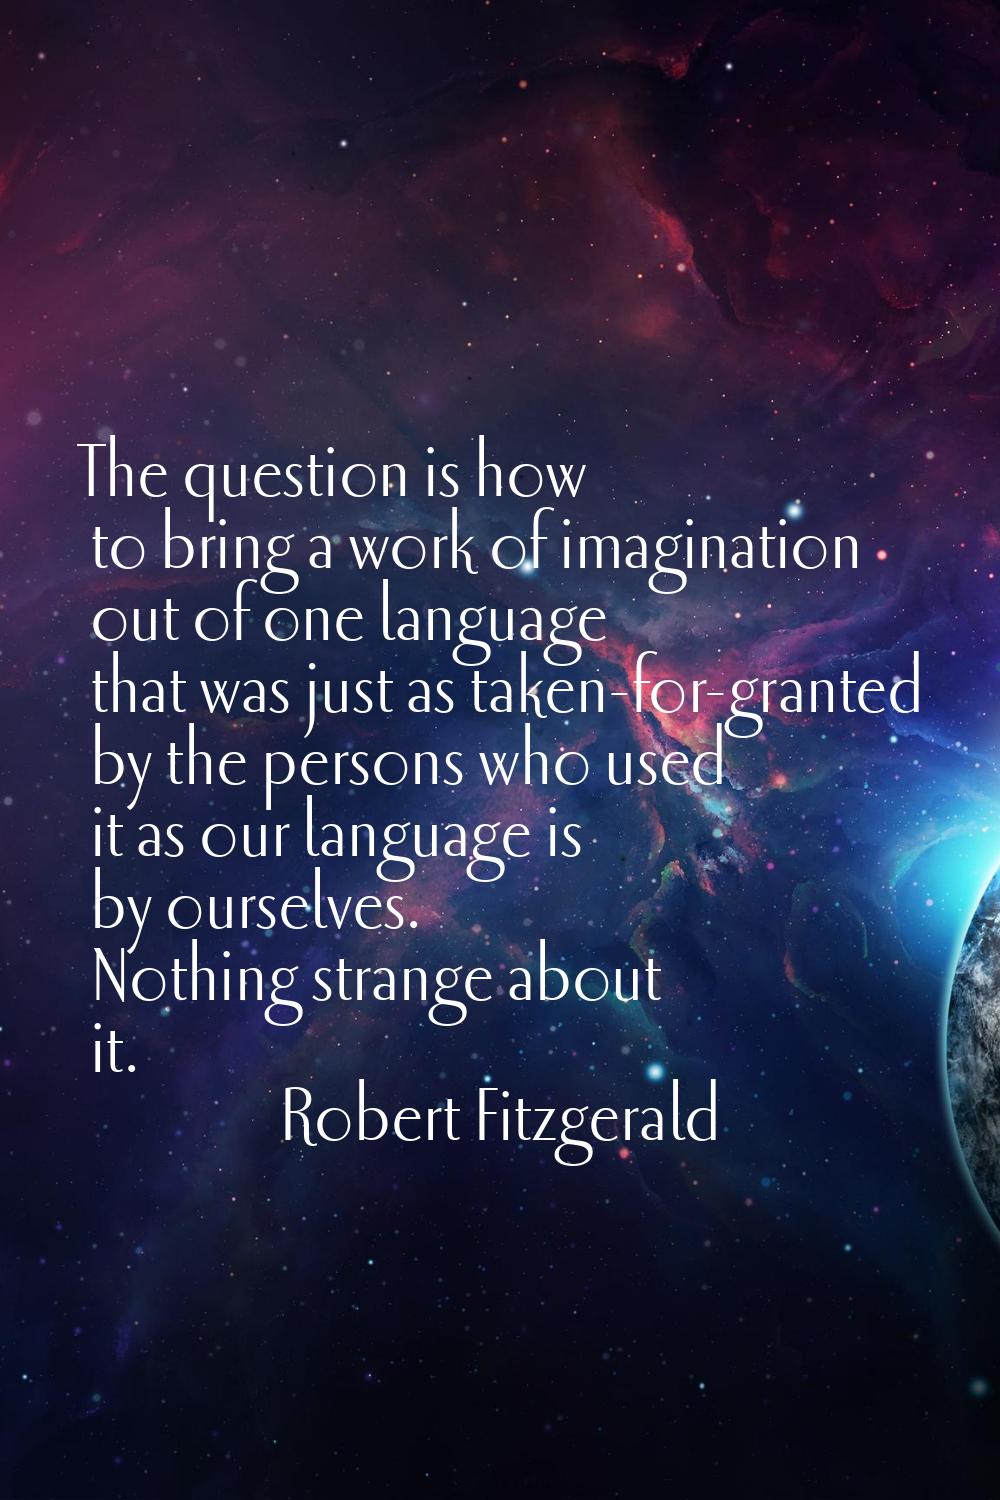 The question is how to bring a work of imagination out of one language that was just as taken-for-g